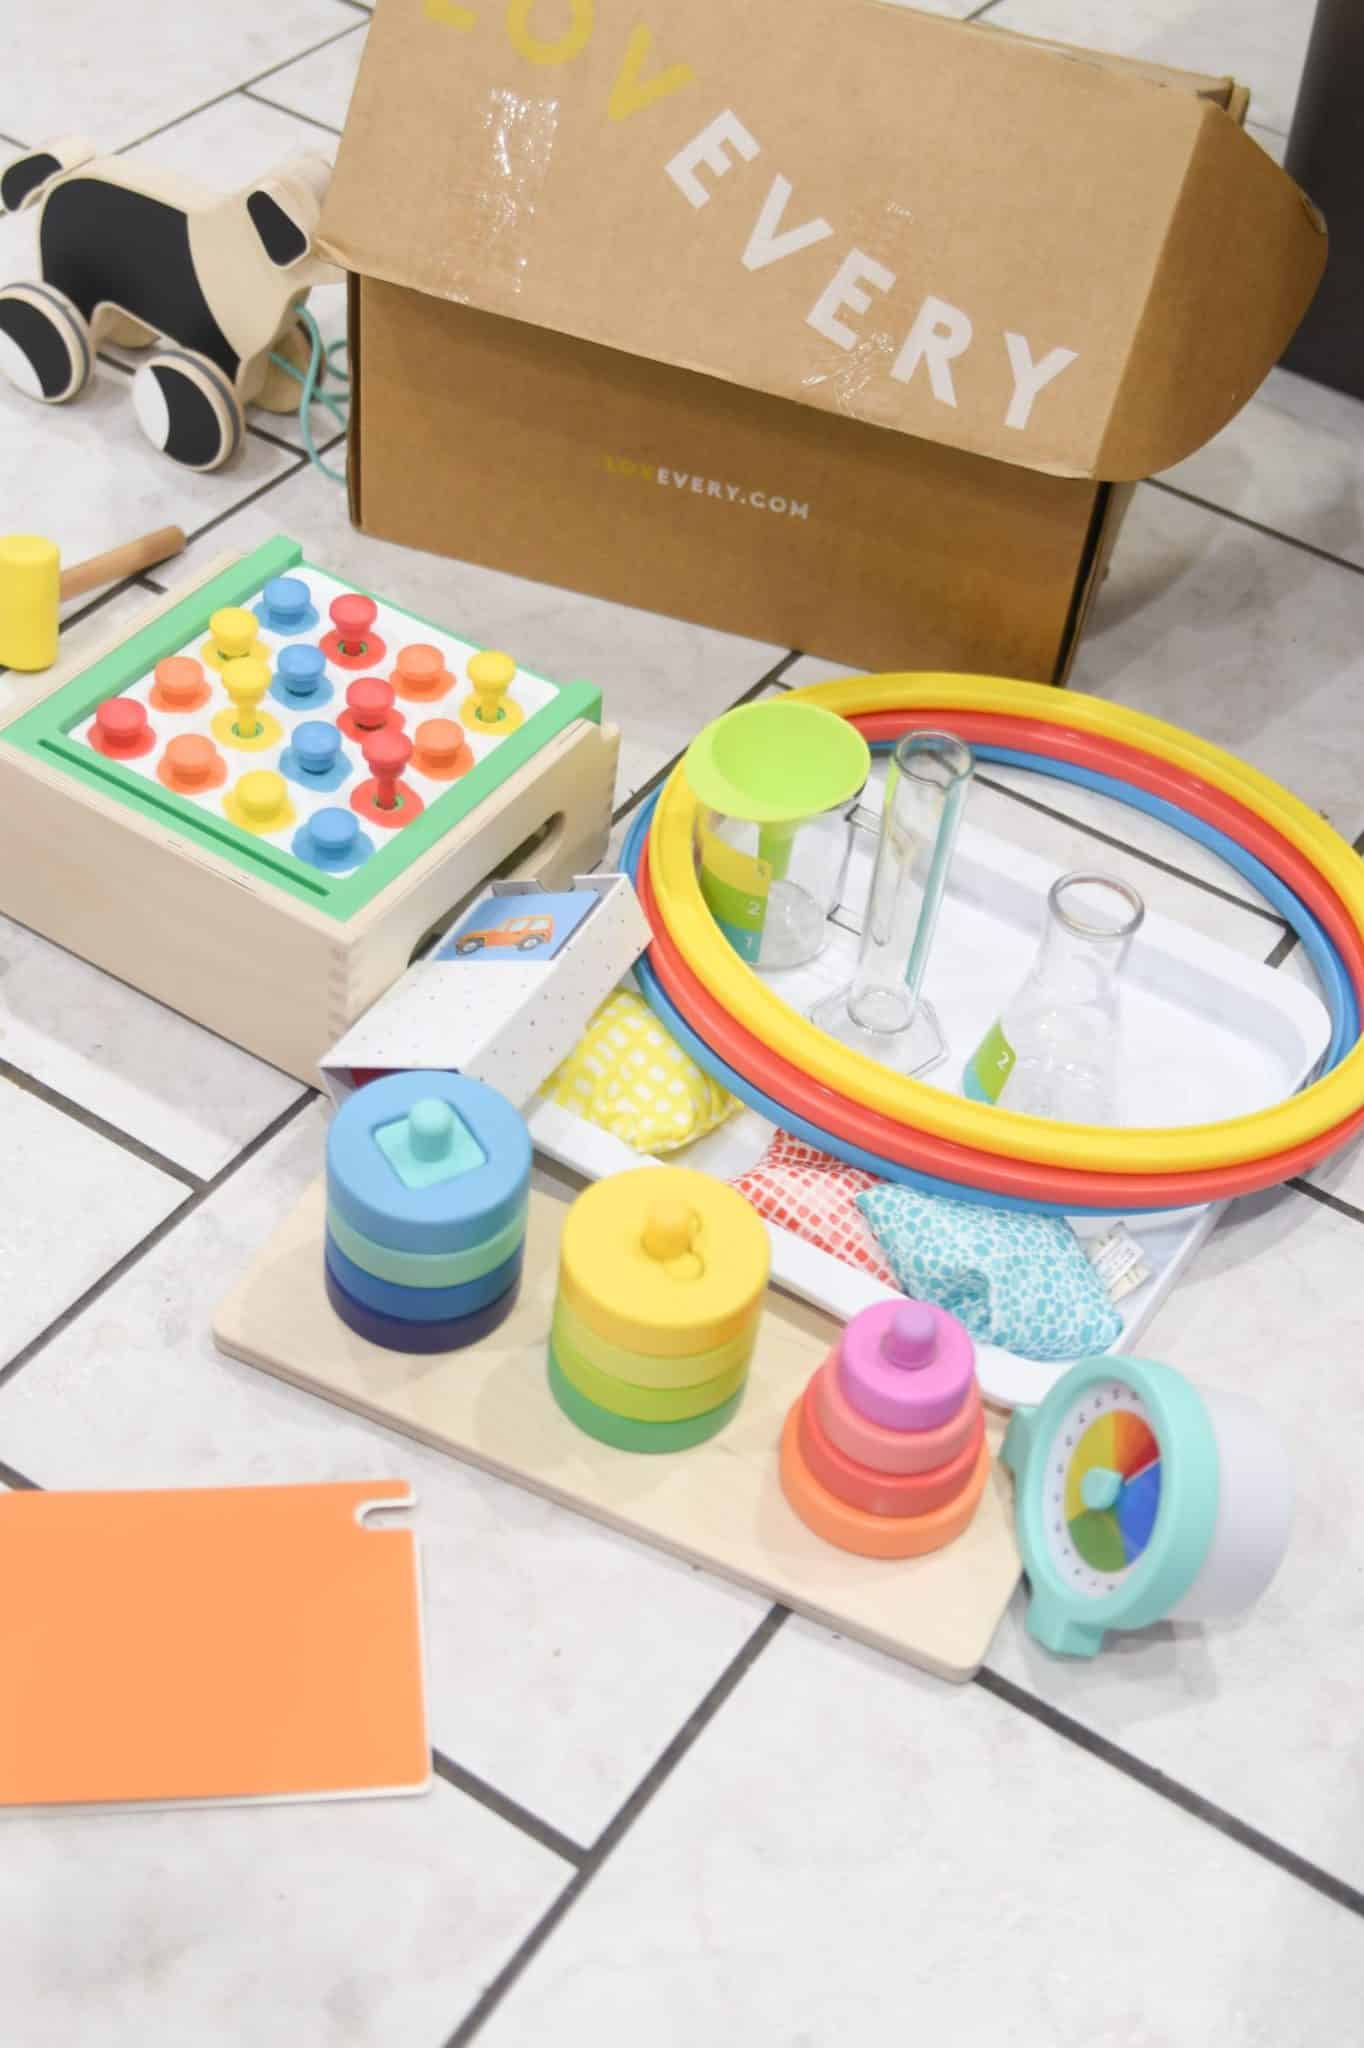 Lovevery Review - Is the Play Kit Subscription Worth It? - My Home